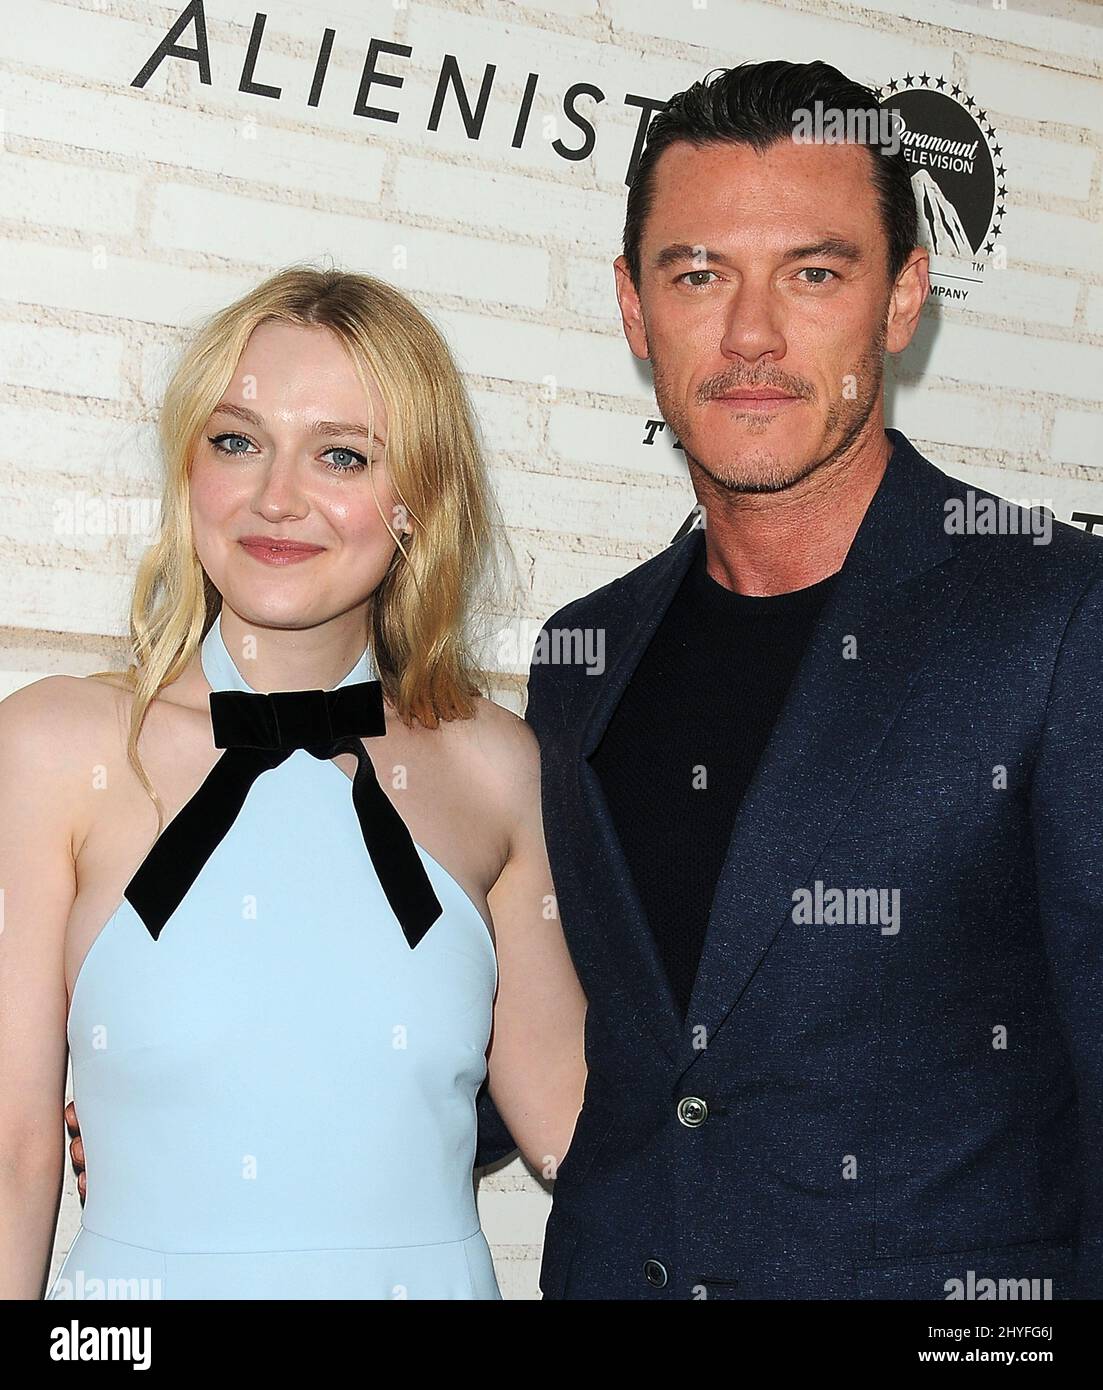 Dakota Fanning and Luke Evans attending the NT's 'The Alienist' FYC event held at the Wallis Annenberg Center, CA on May 23, 2018. Stock Photo